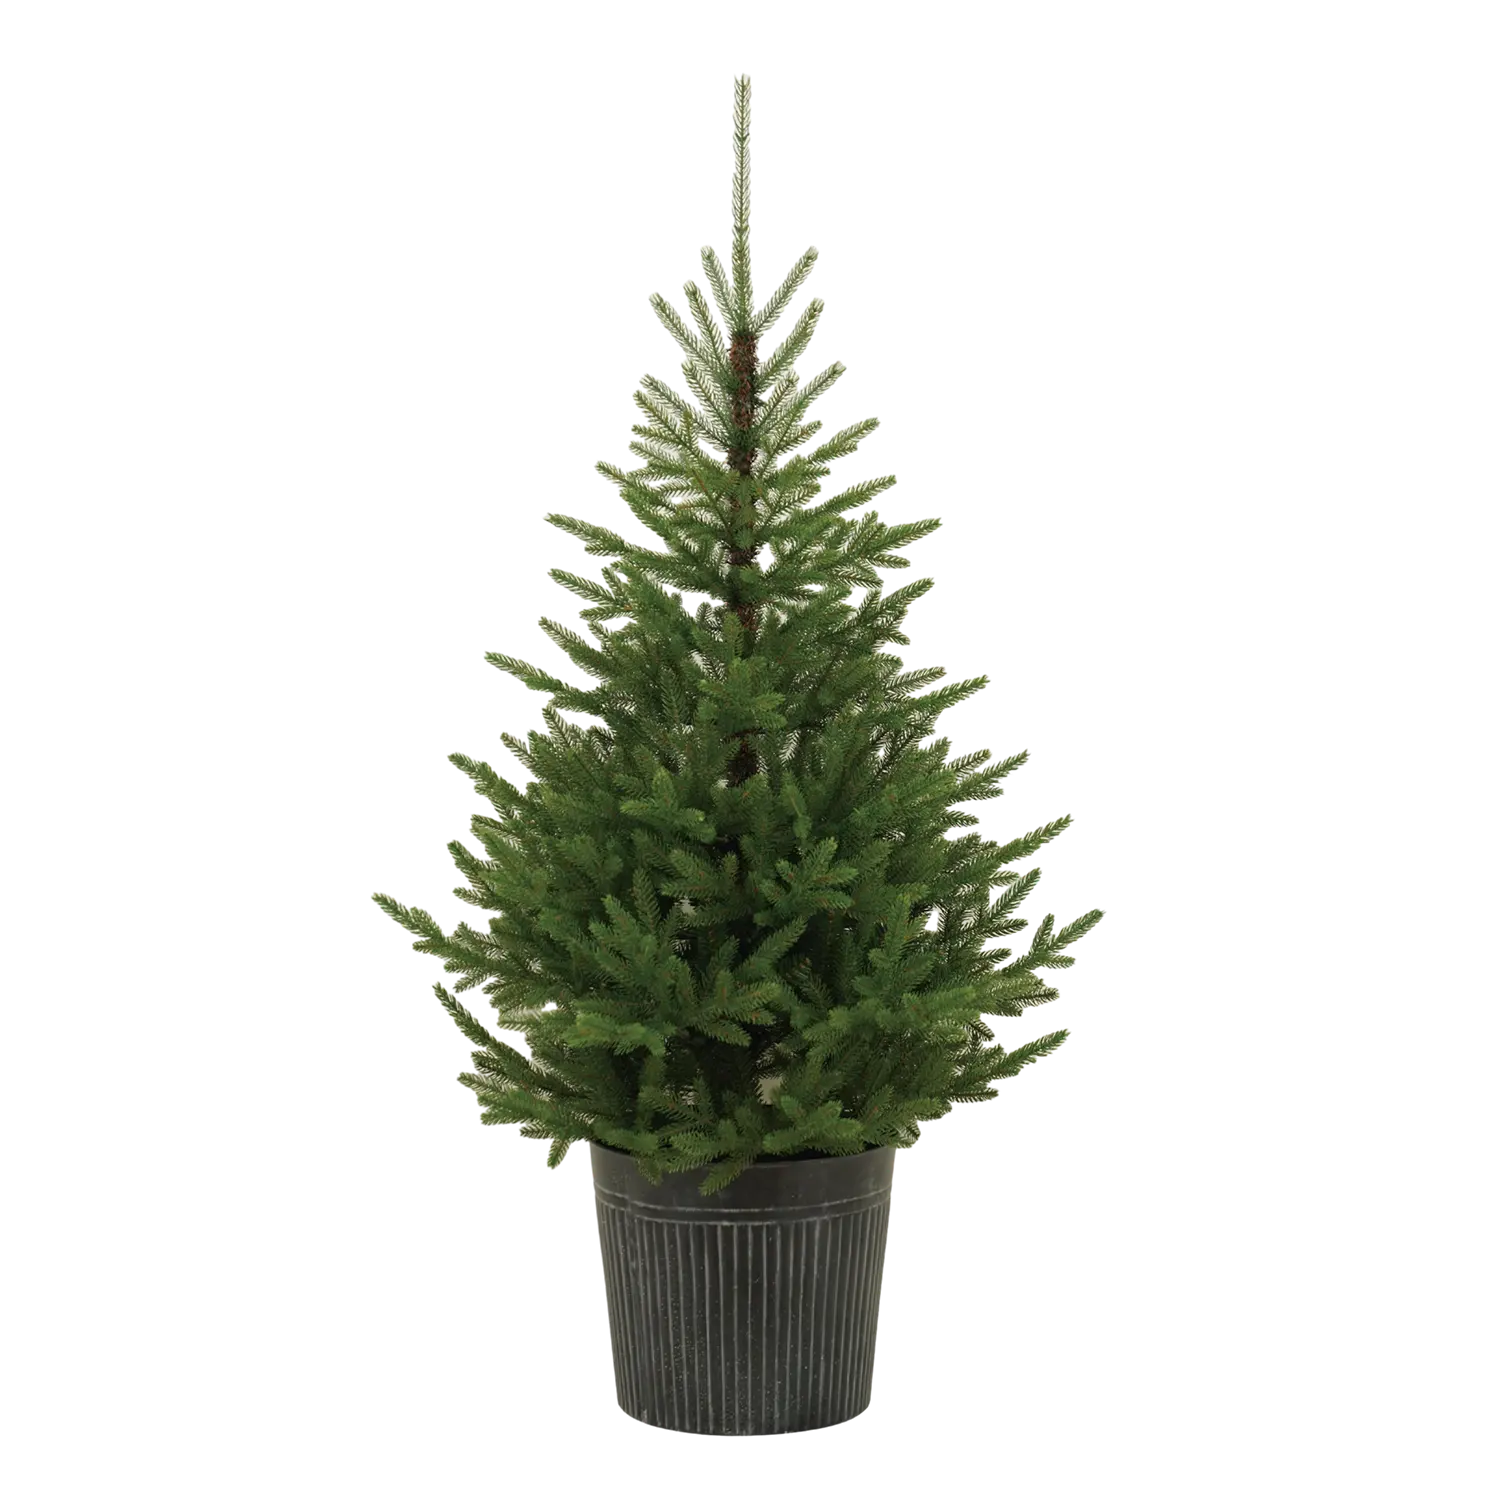 Senmasine 4.5ft 5ft Pvc Pe Mixed Pine Needle Artificial Christmas Potted Trees For Outdoor Indoor Home Festival Decoration